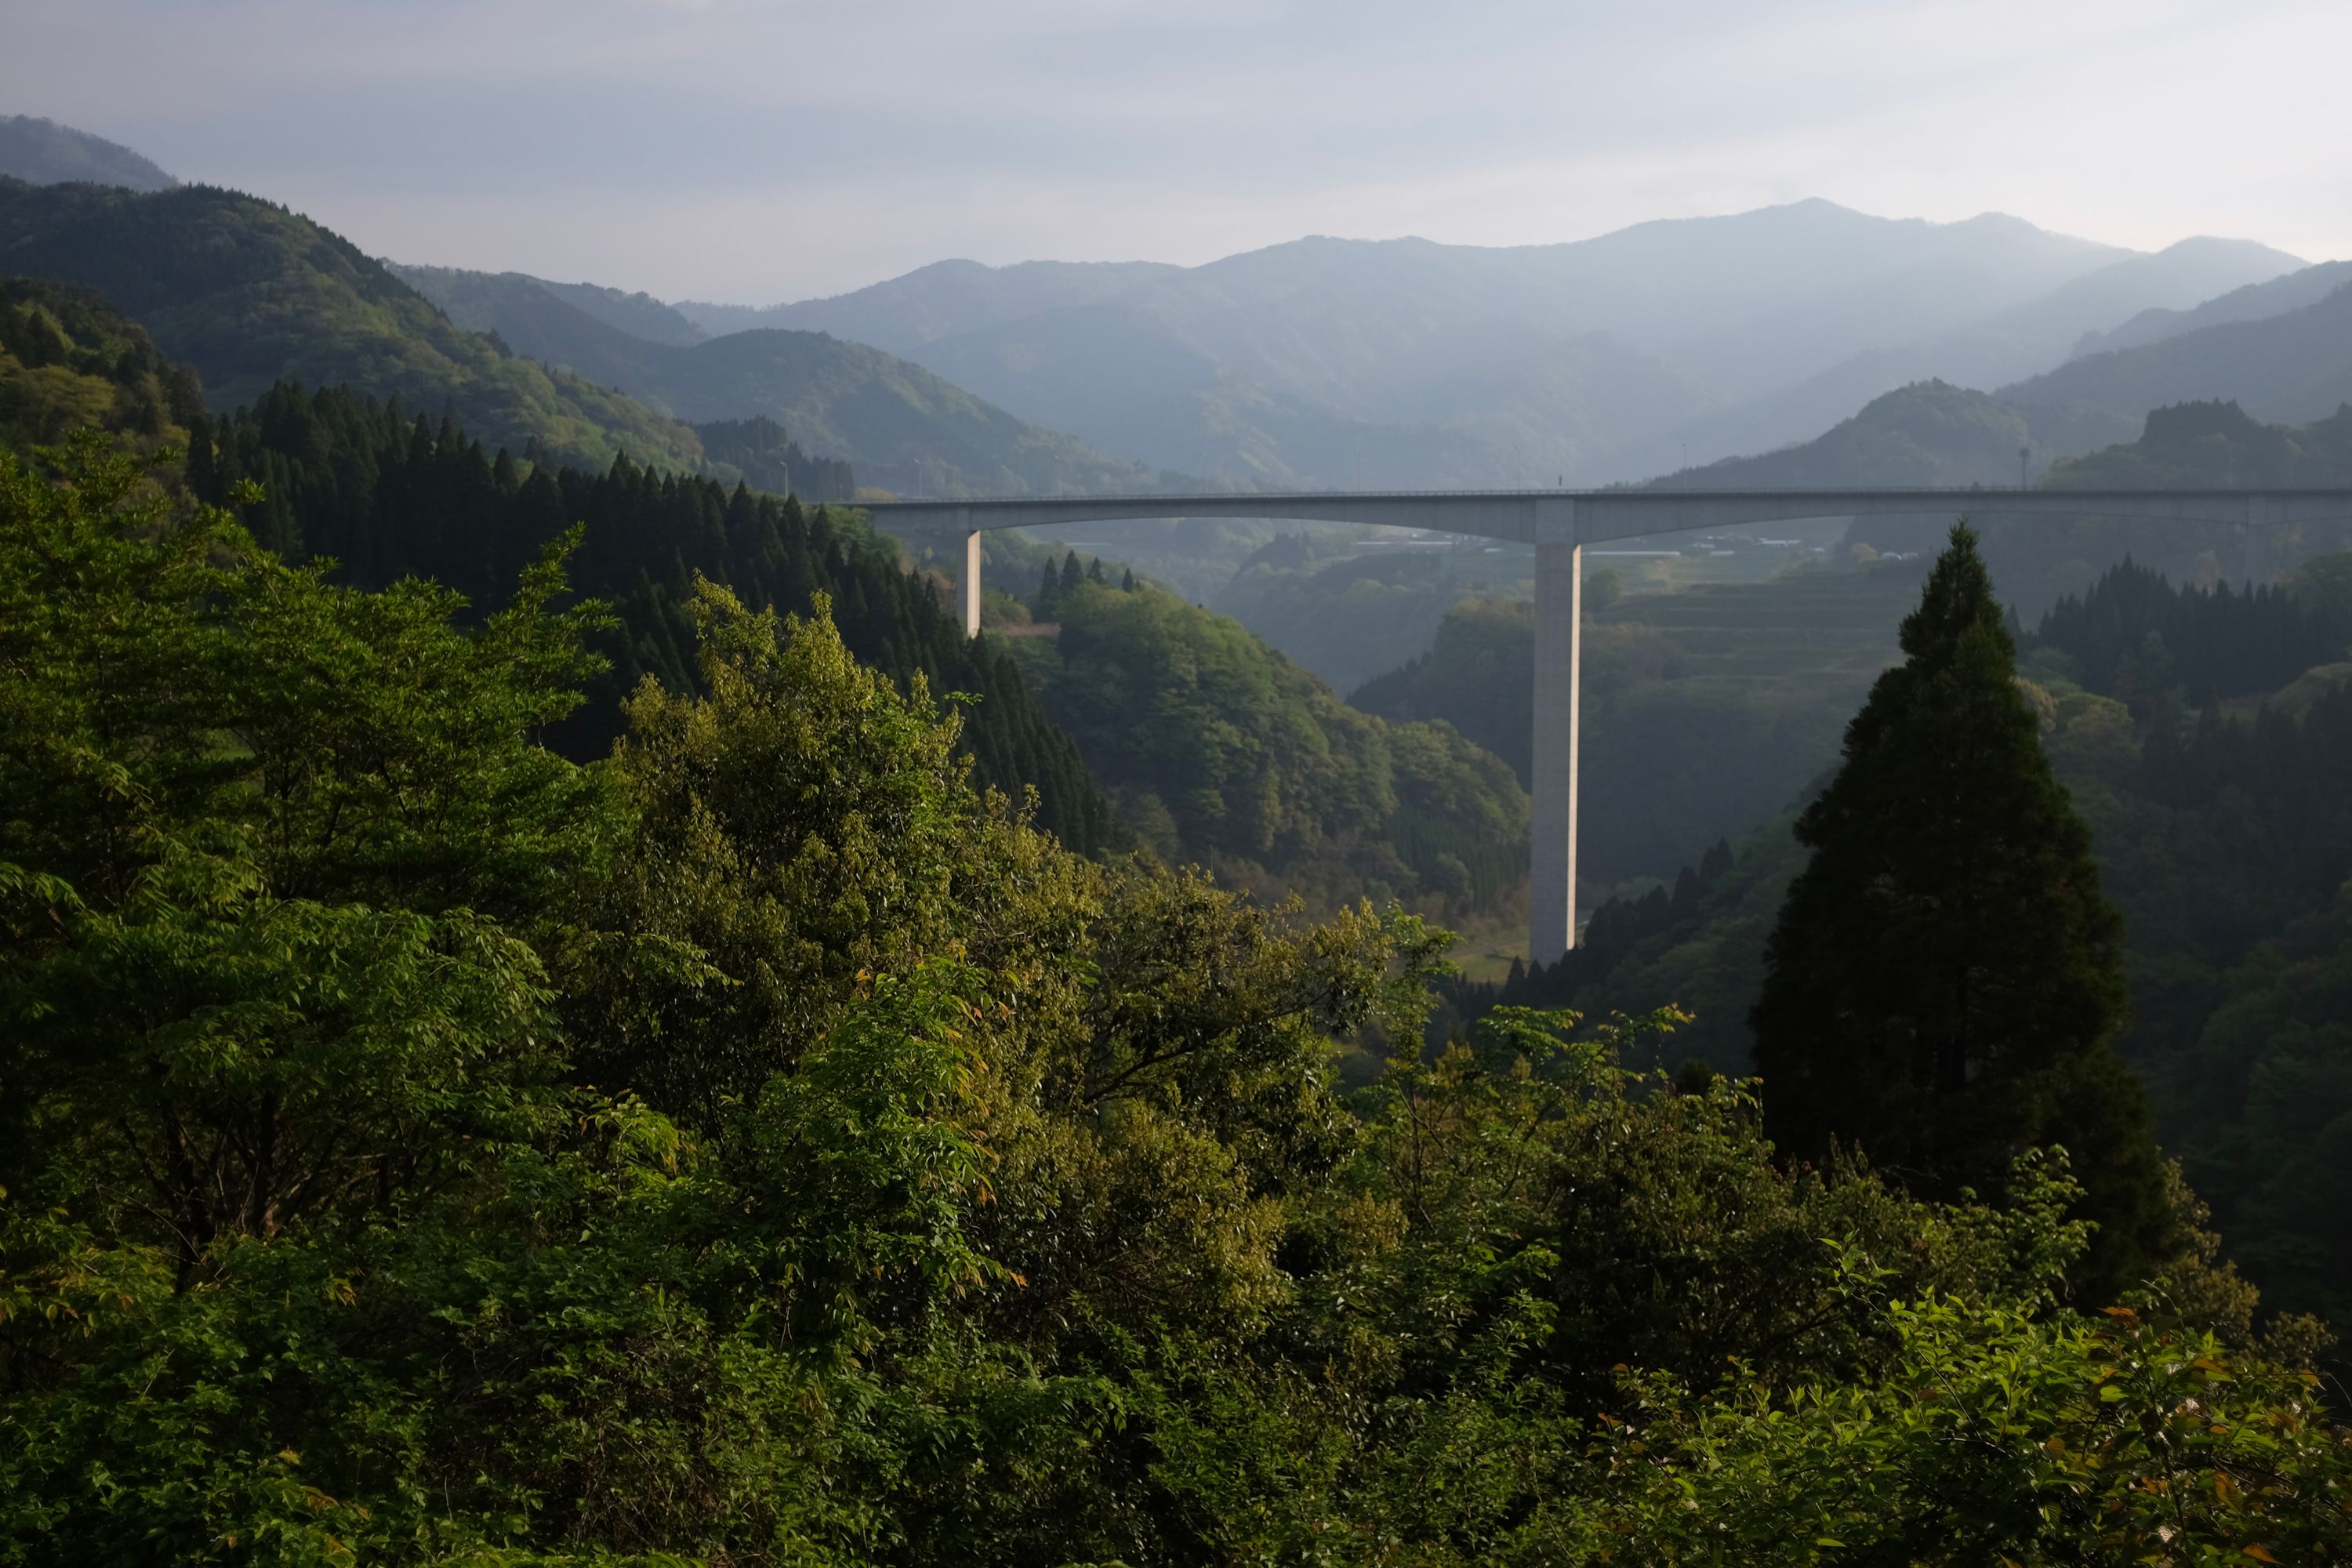 A very high and long bridge spans a valley.